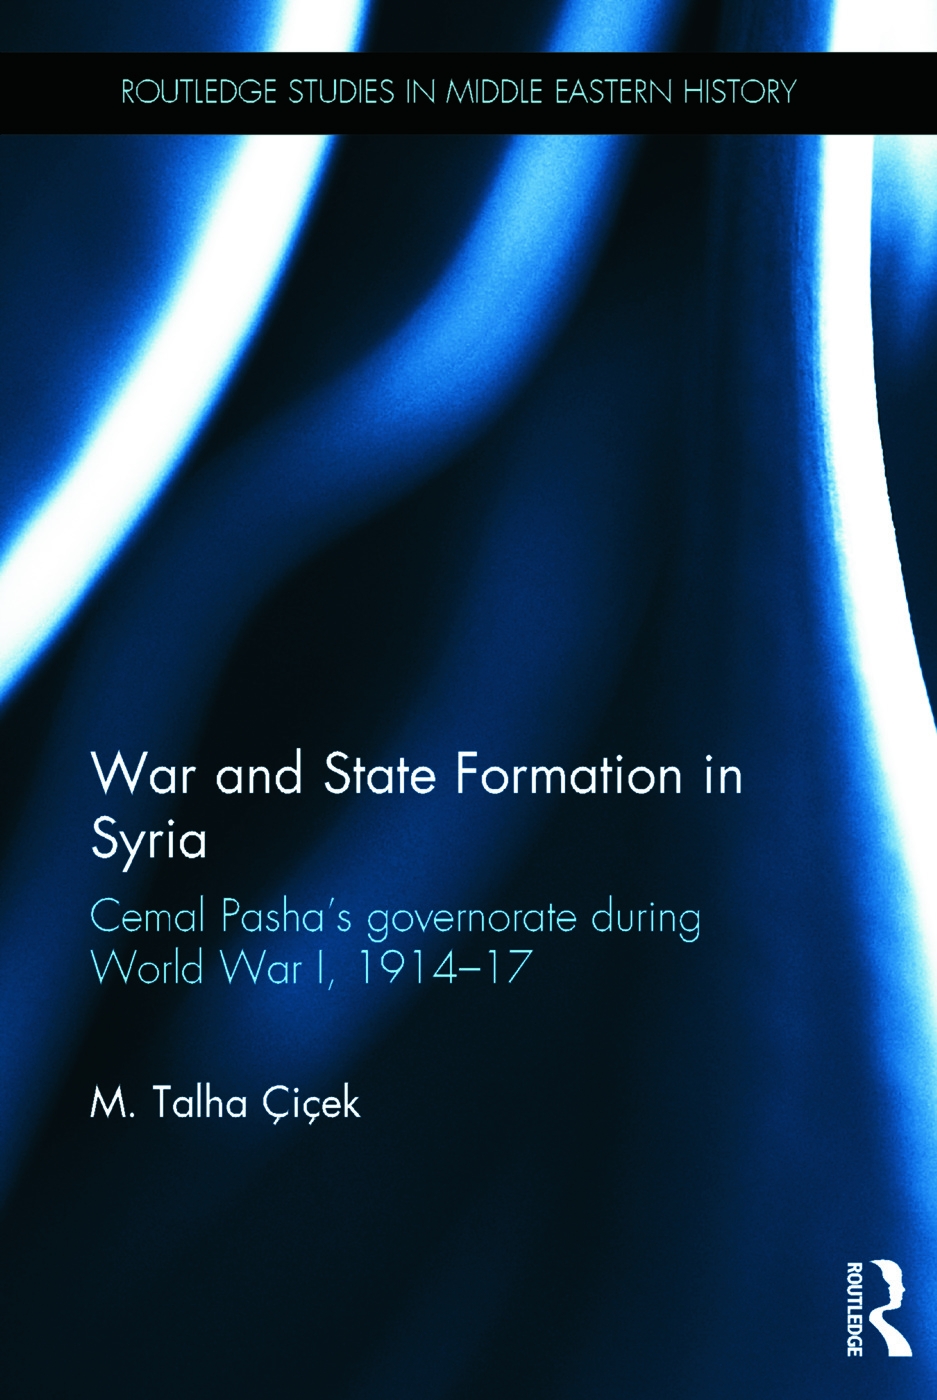 War and State Formation in Syria: Cemal Pasha’s Governorate During World War I, 1914-17